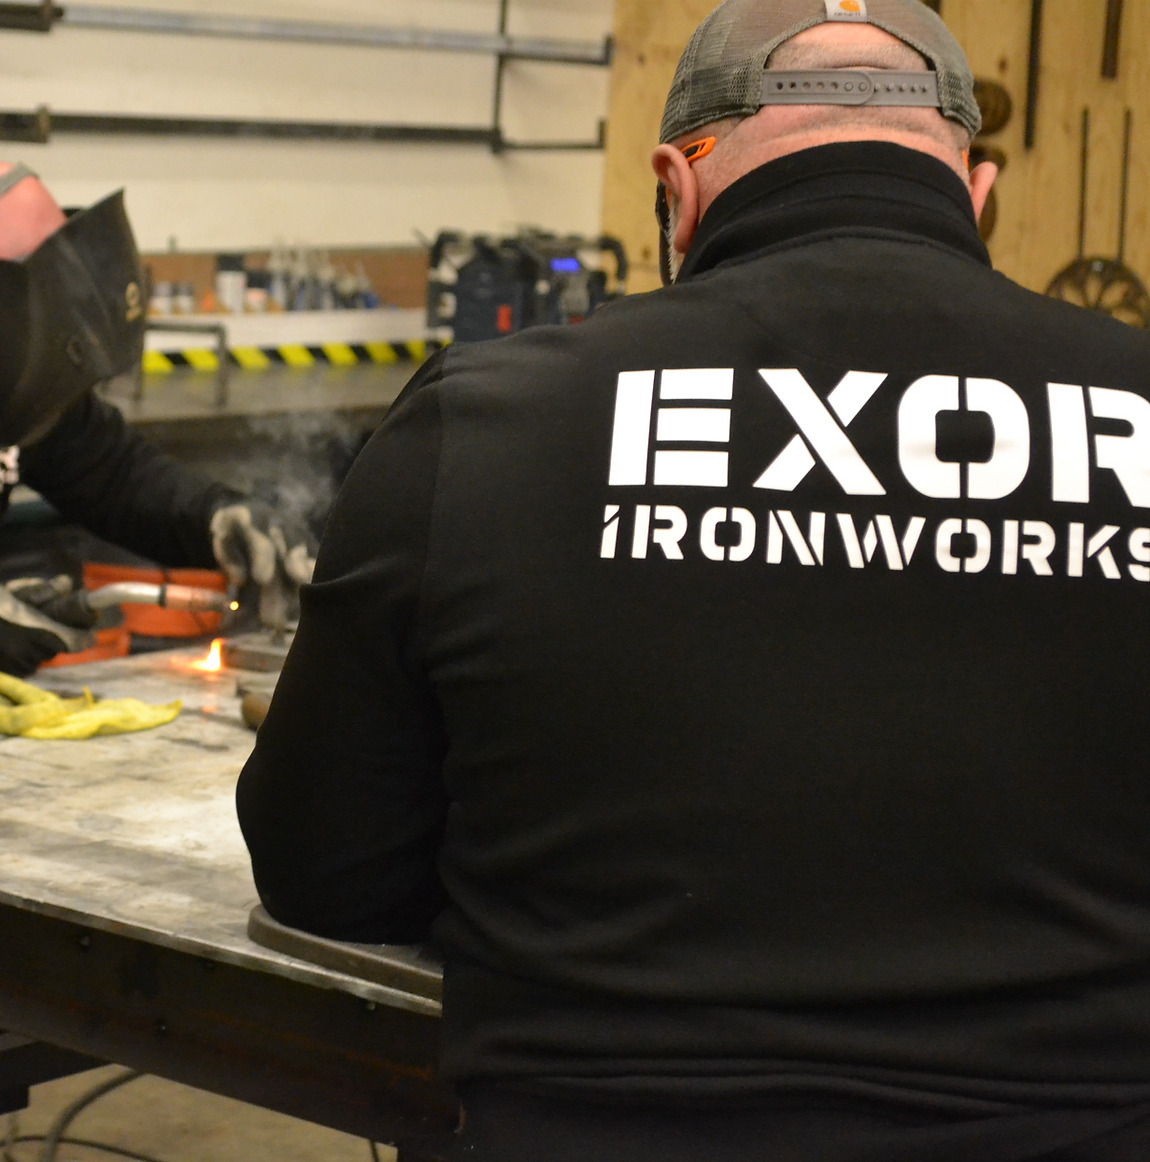 Exor Ironworks is the top supplier of gate and fence installation and maintenance services, catering to both business and residential customers in Bellevue, Washington.